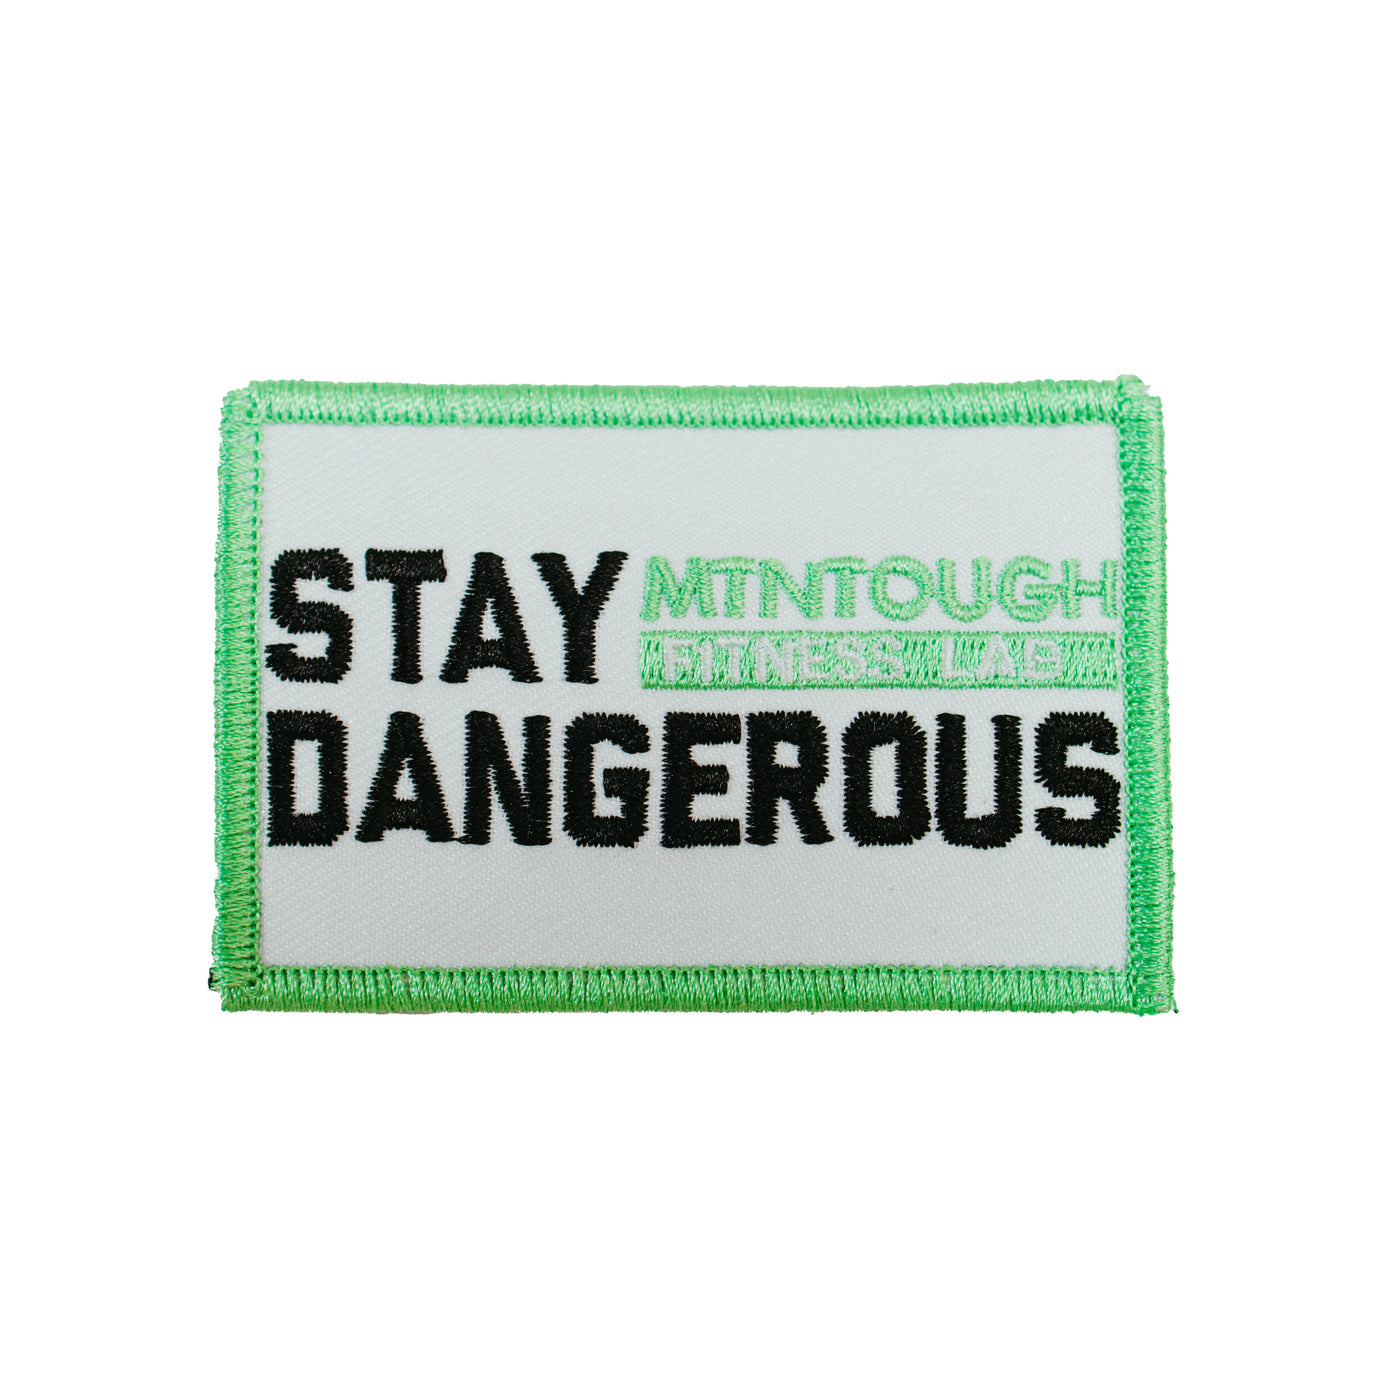 MTNTOUGH "Stay Dangerous" Velco Patch